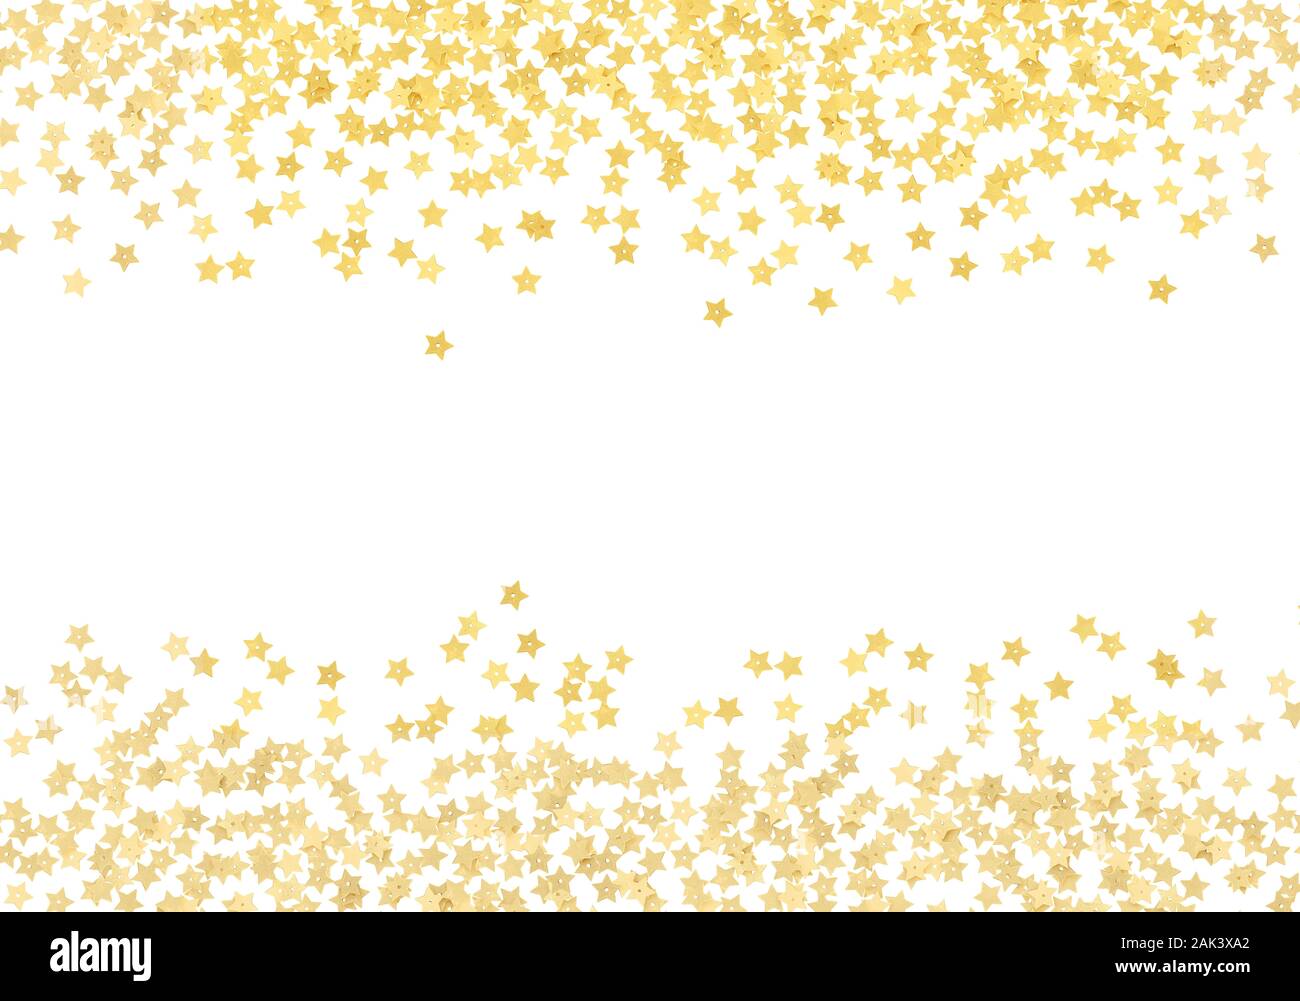 Scattered gold star shape confetti borders isolated on white background Stock Photo